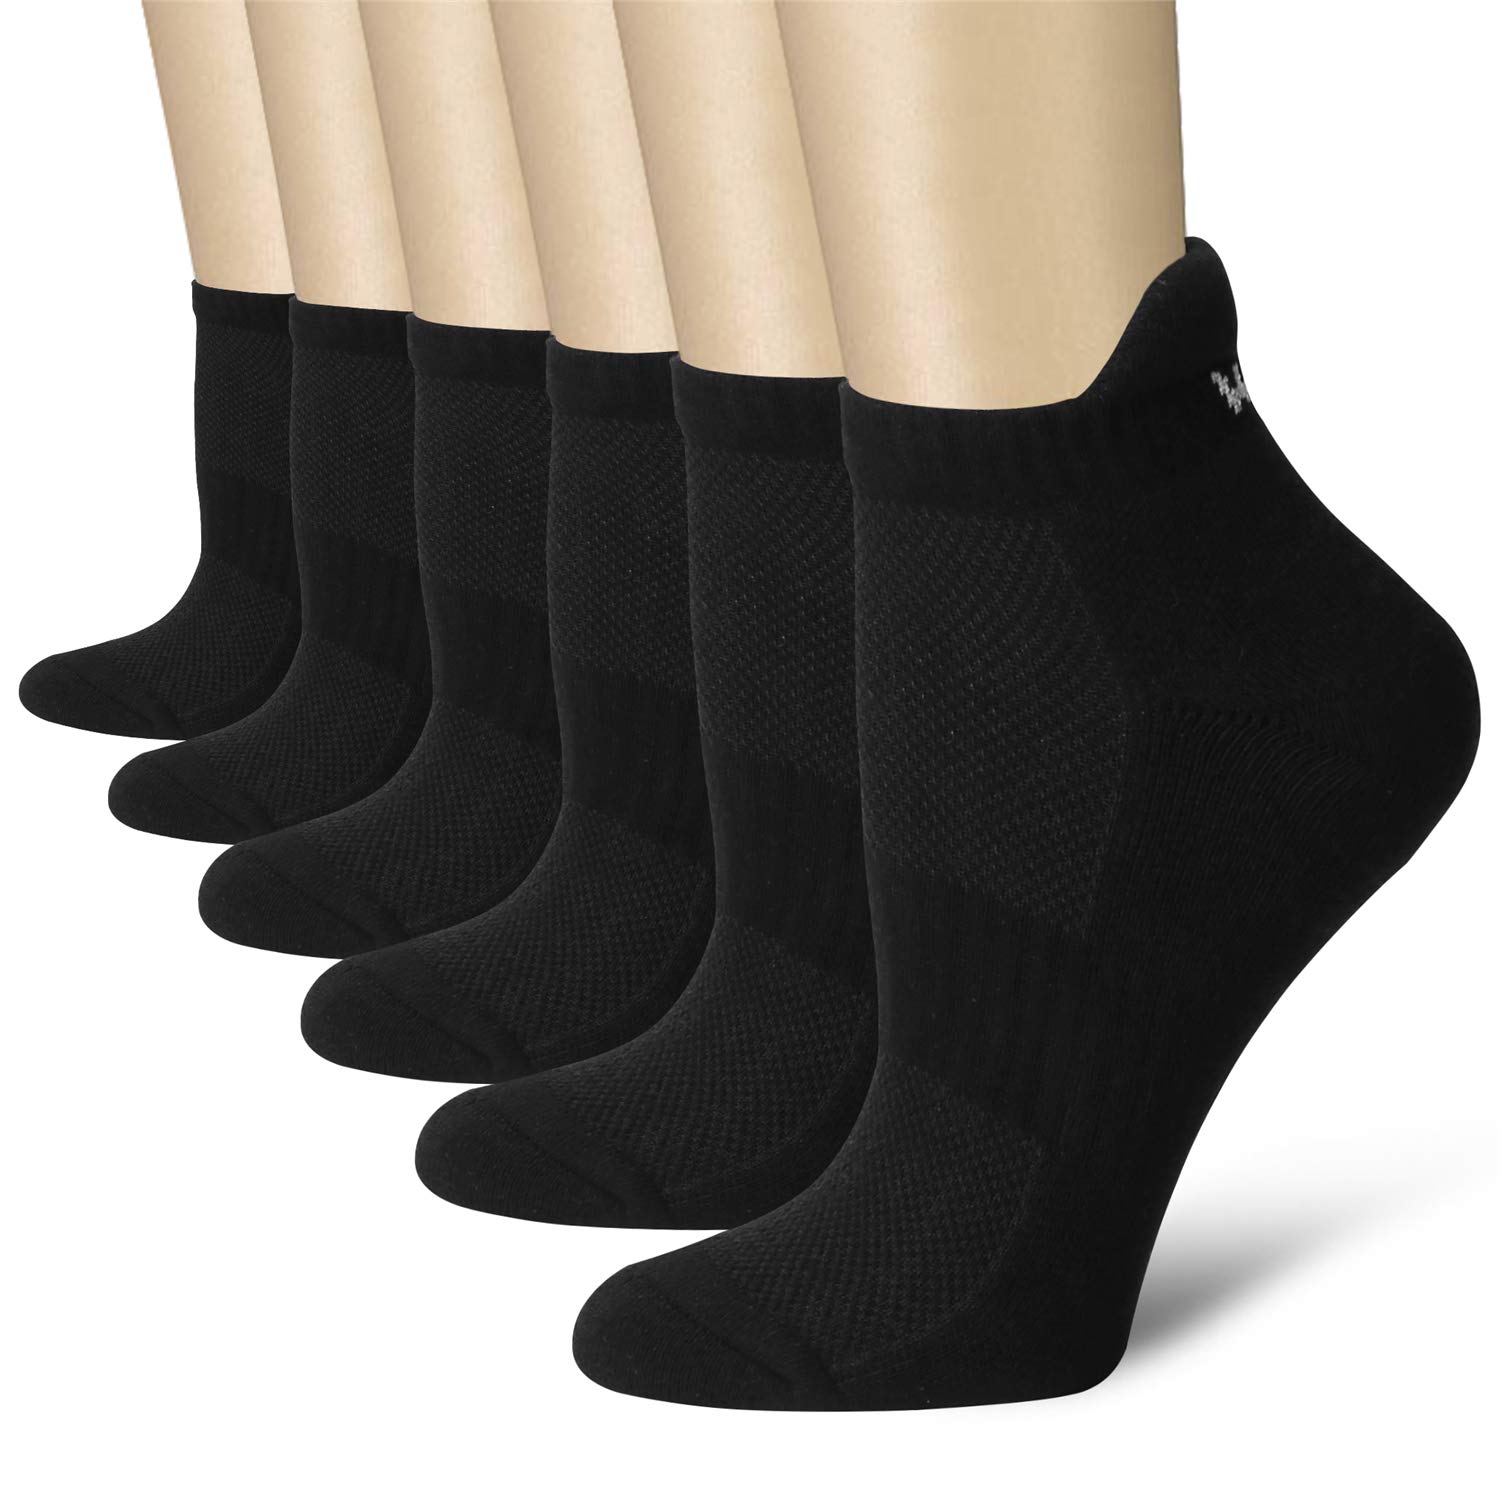 7 Pairs Compression Socks for Women & Men 15-20 mmHg Best Support